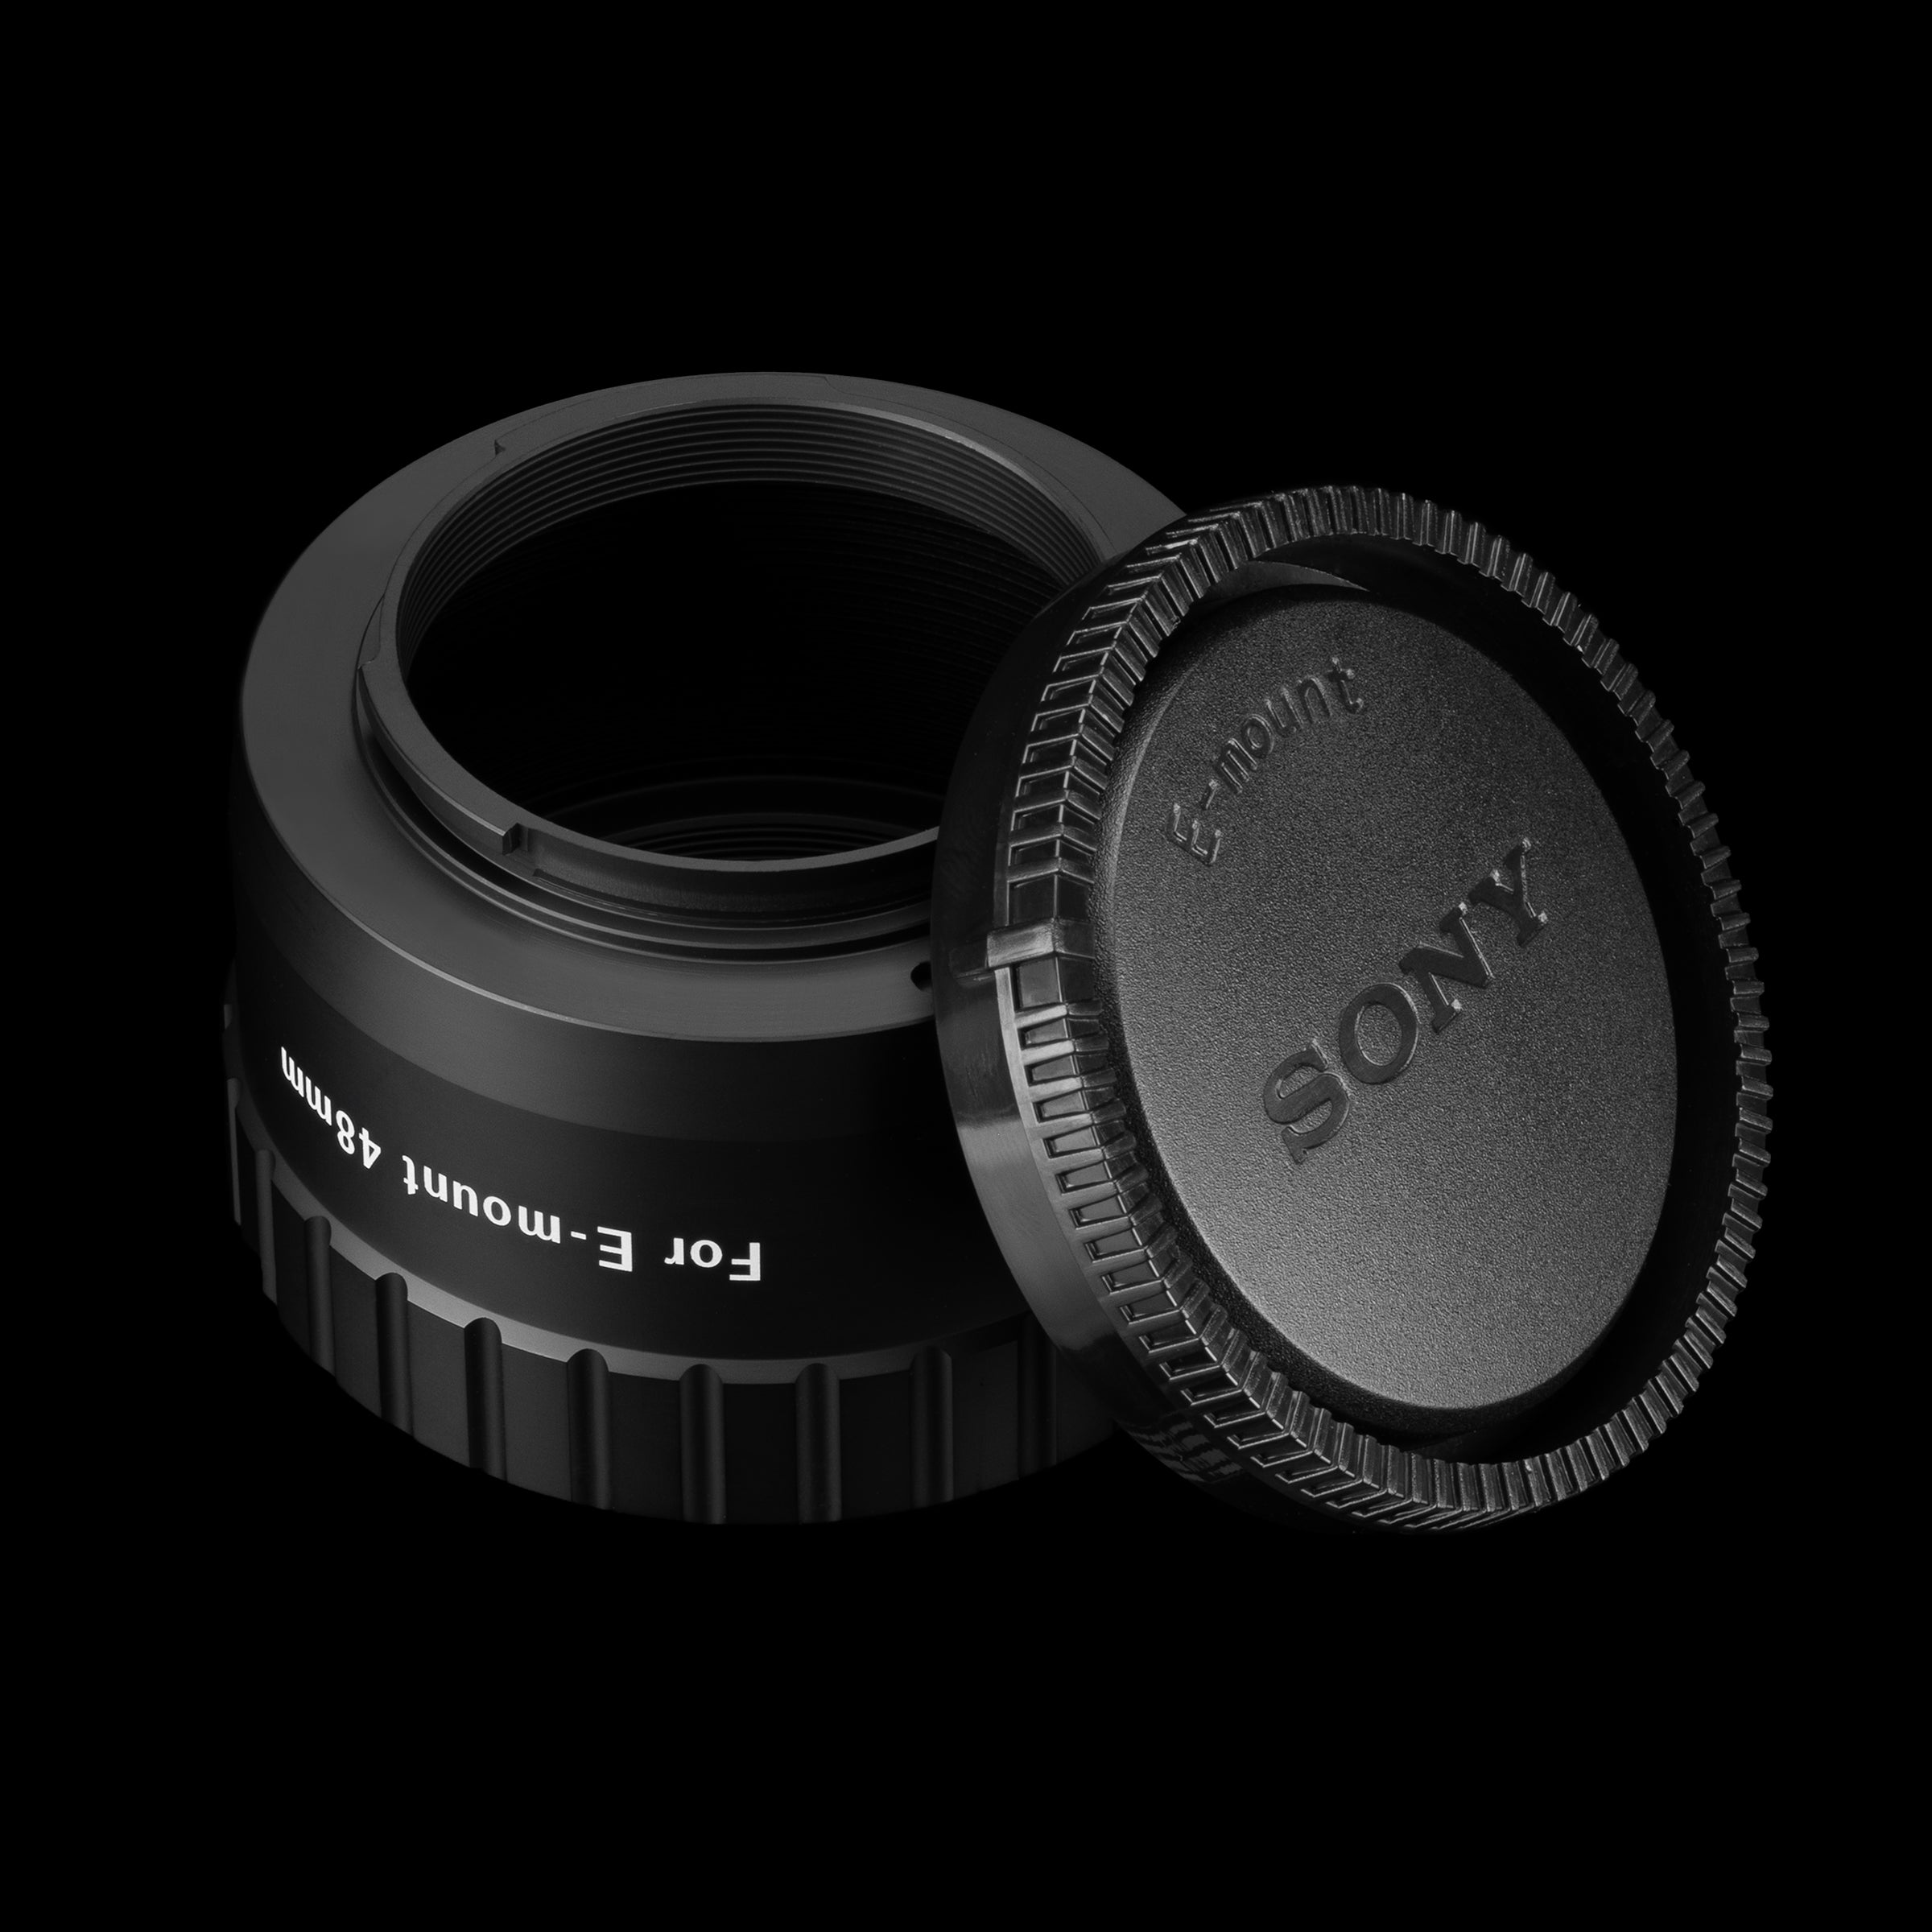 48mm T mount for Sony E